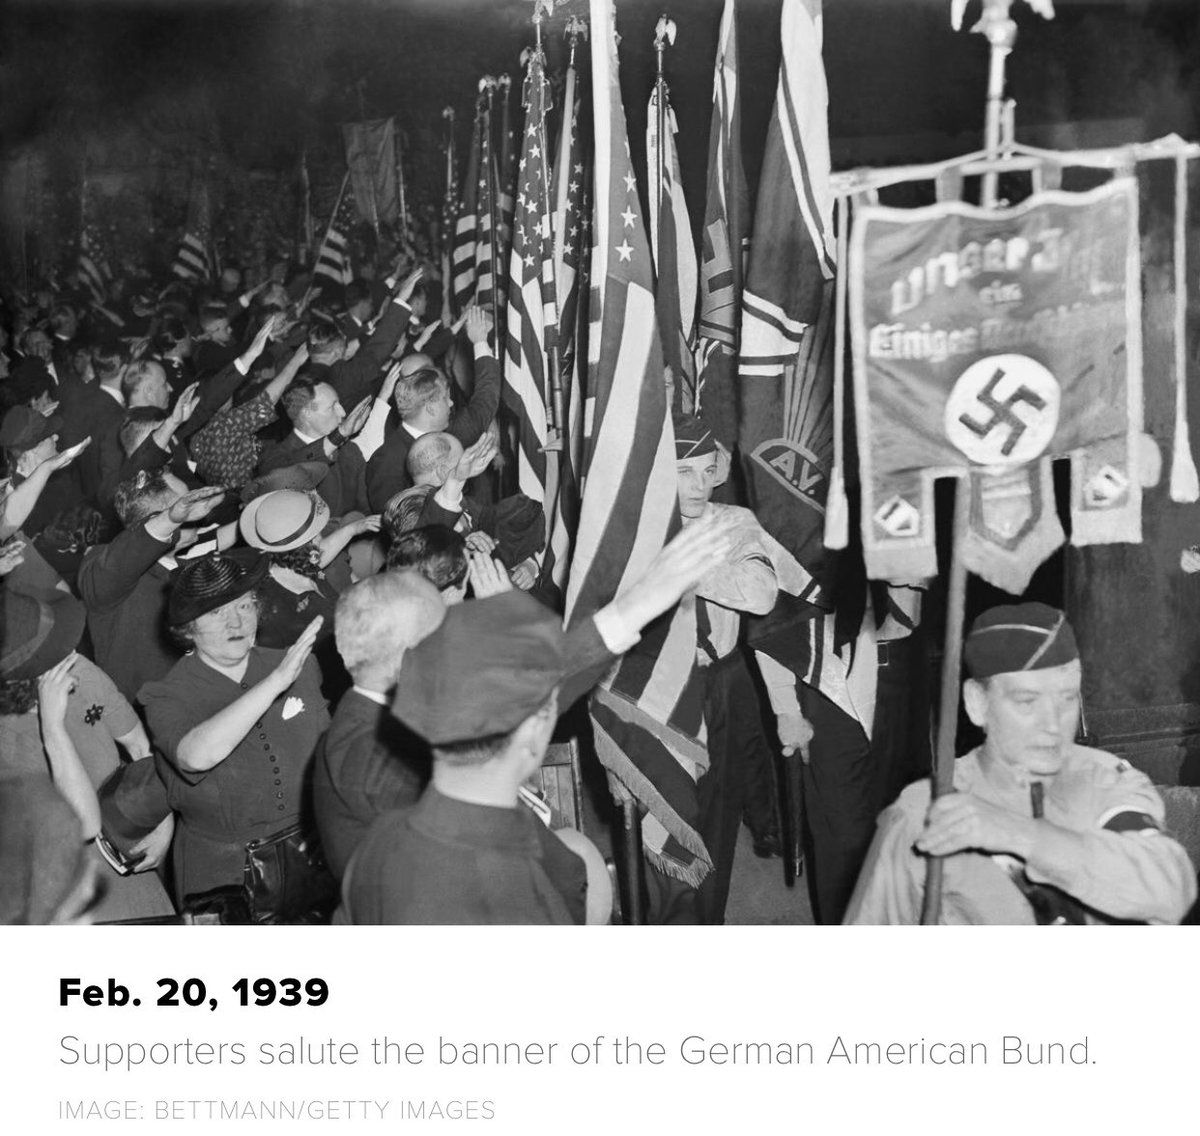 The Nazi Bund held rallies at Madison Madison Square Garden from 1934-1939.On Feb 20, 1939—20,000 Bund members held their largest “Pro-America Rally.”Inside, Hitler Nazi supporters filled the aisles while speakers spoke against Dem POTUS “Frank D. Rosenfeld” & his “Jew Deal.”